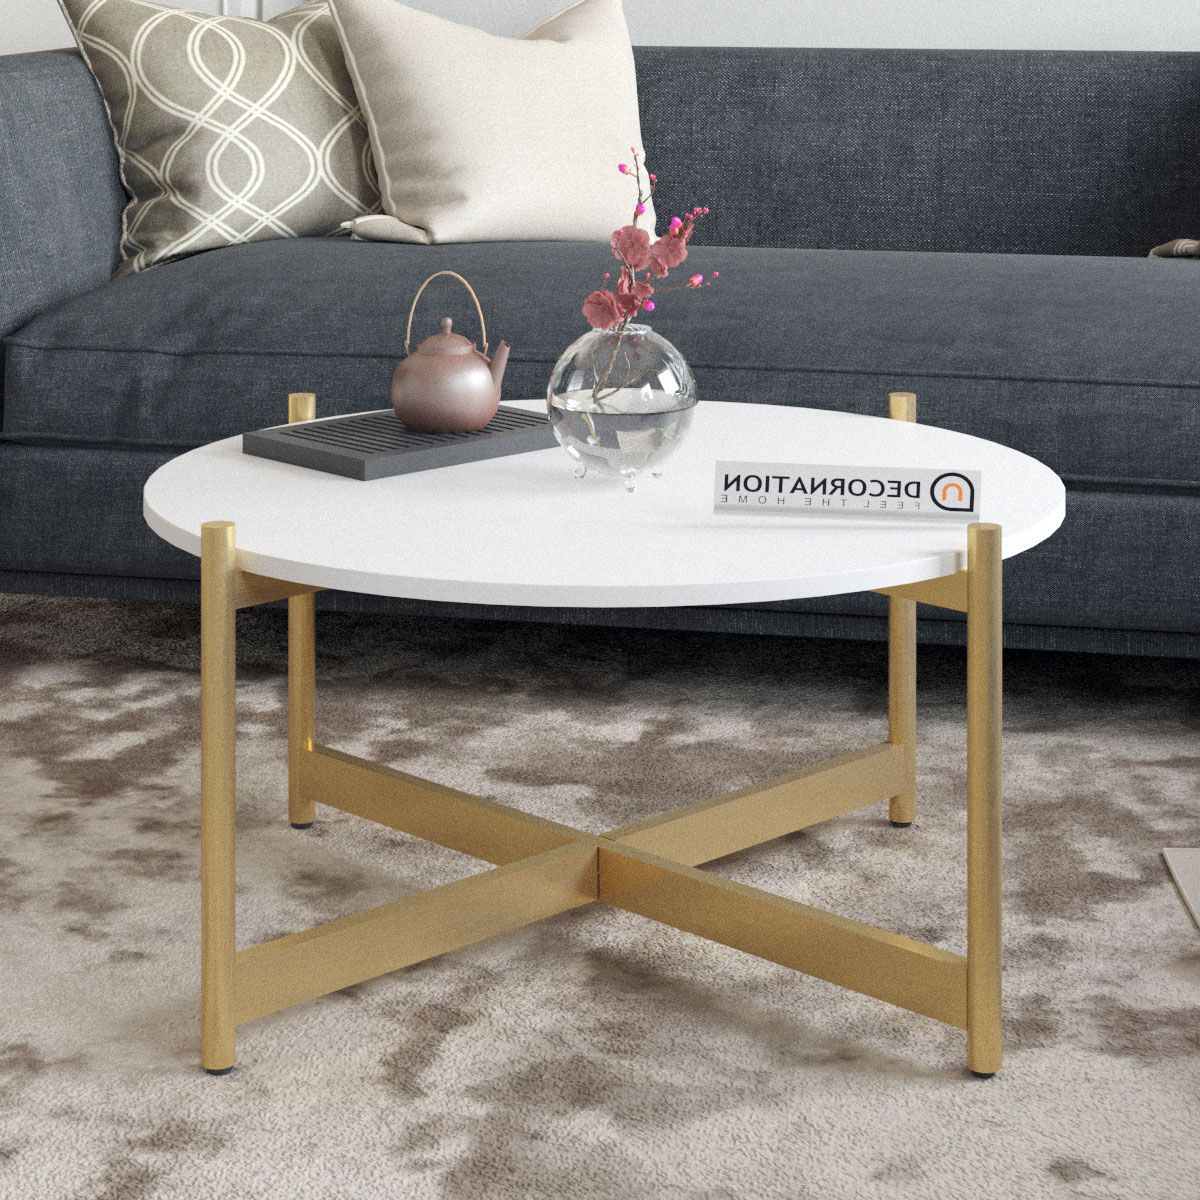 Cherrie Round Metal Leg Coffee Table – Decornation Intended For Preferred Iron Legs Coffee Tables (View 8 of 20)